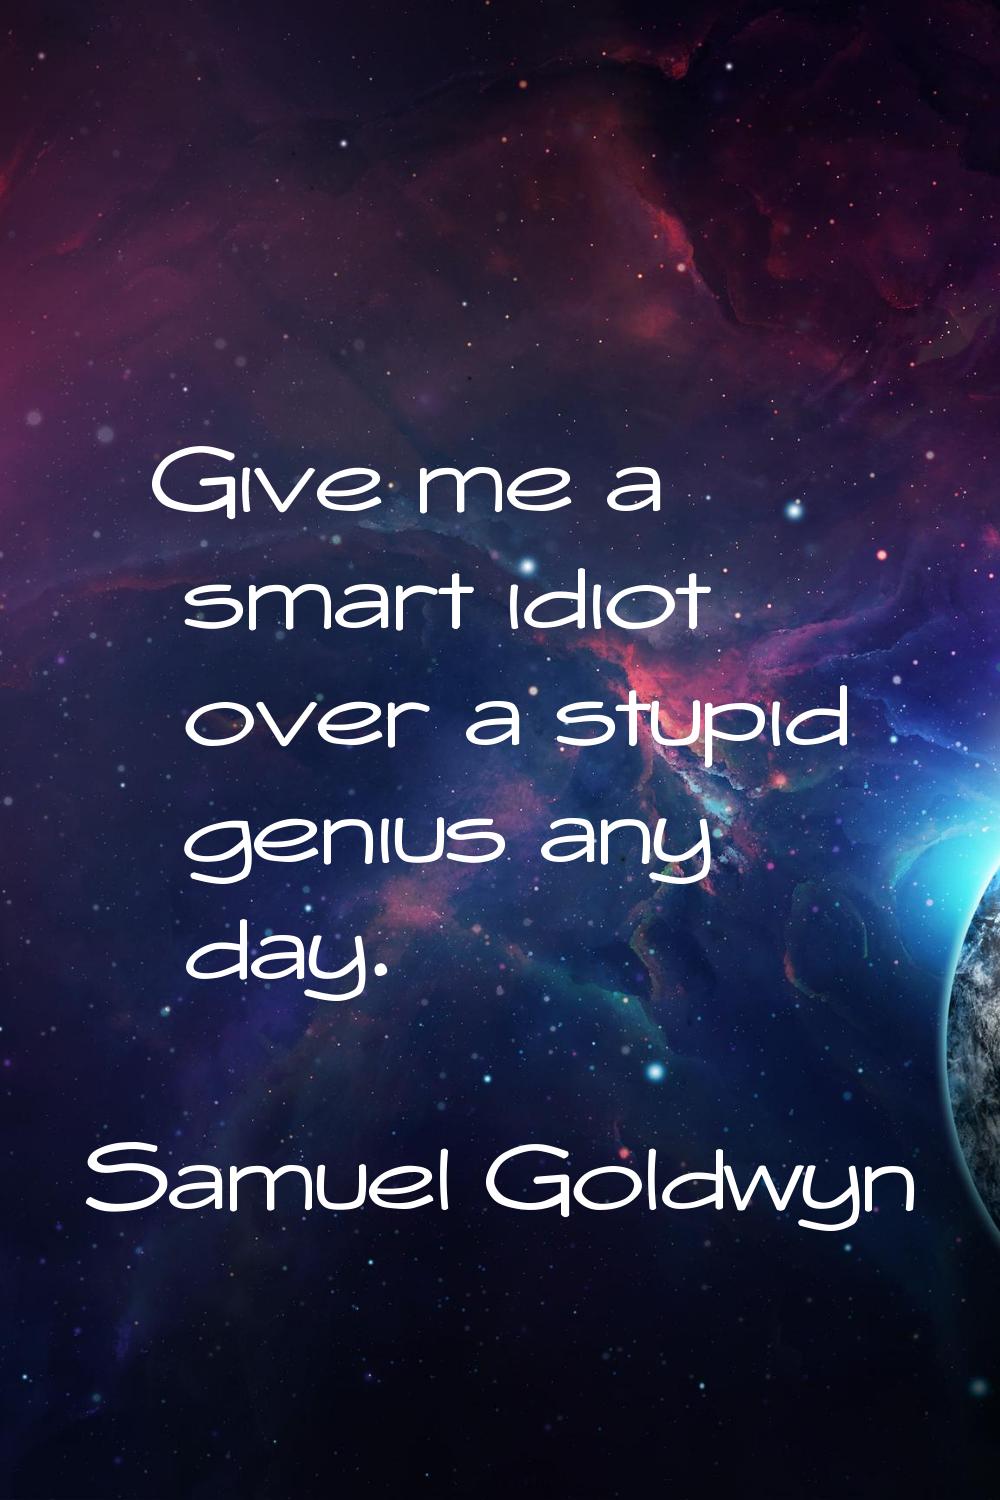 Give me a smart idiot over a stupid genius any day.